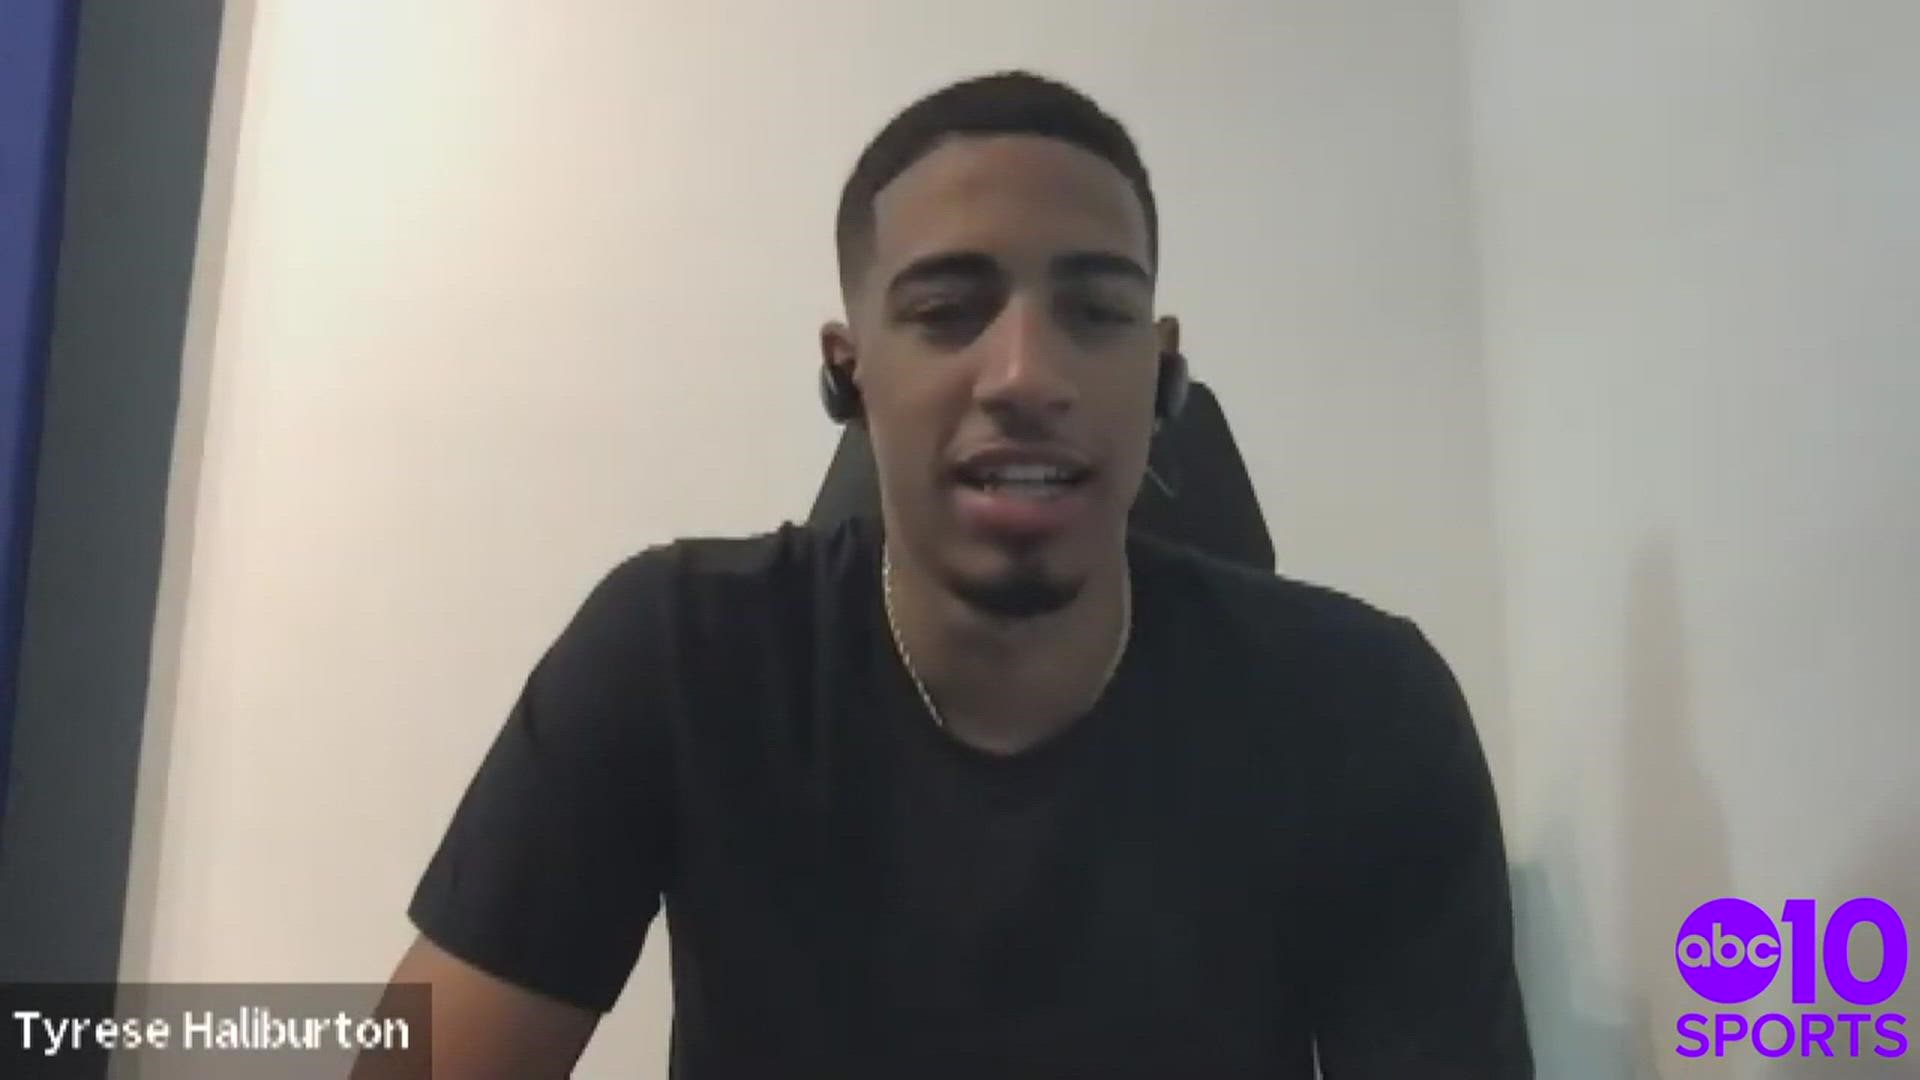 Kings top draft pick Tyrese Haliburton, selected with the 12th overall pick out of Iowa State in the NBA Draft, explains why Sacramento is the perfect fit for him.